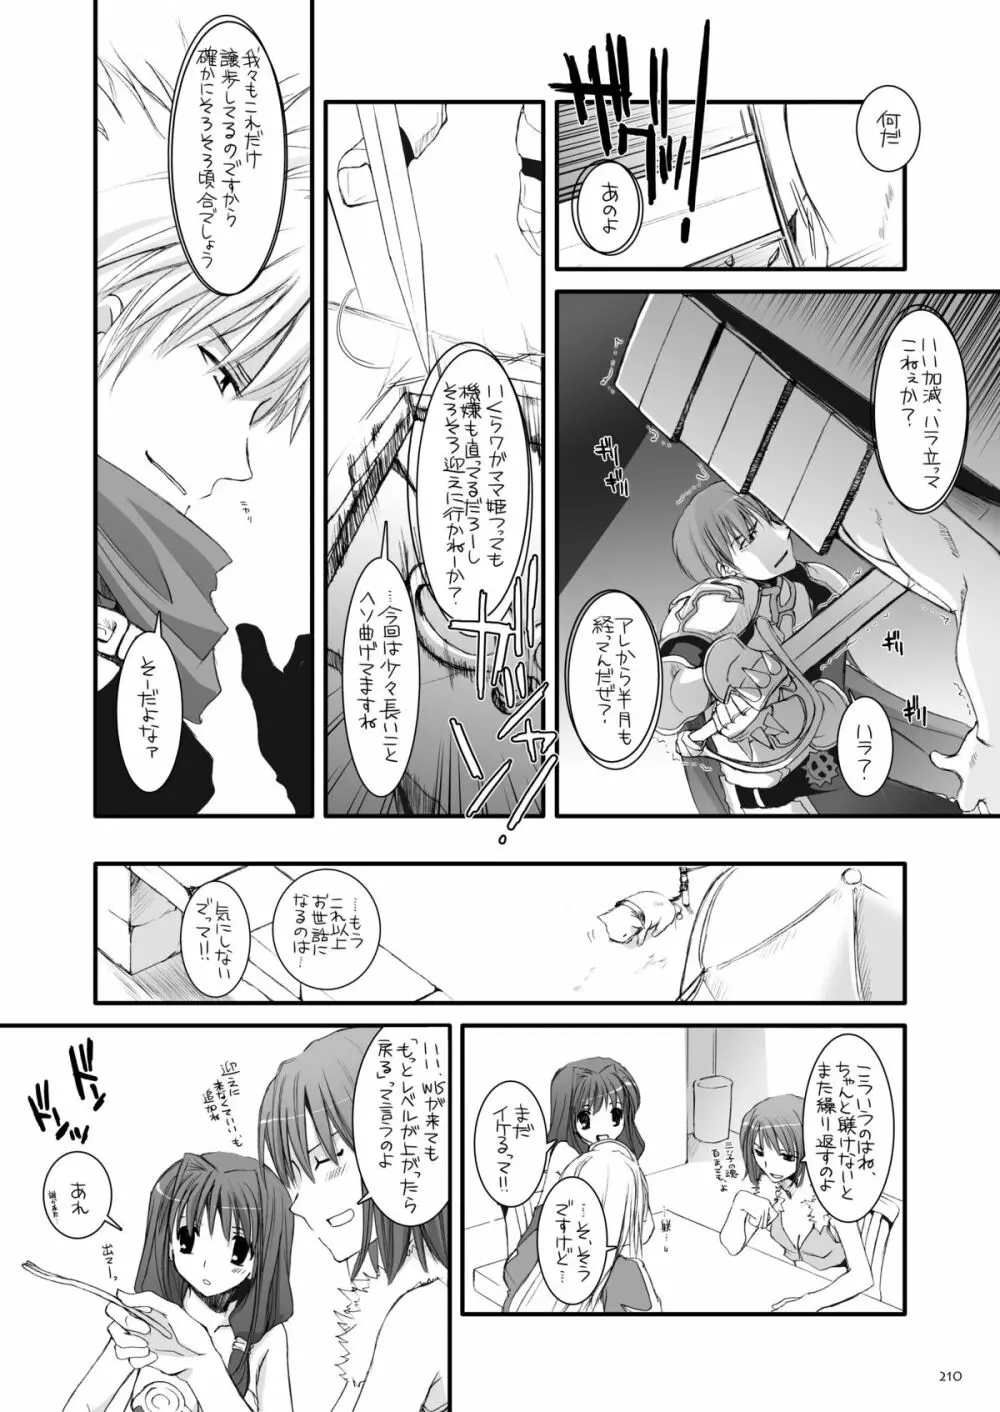 DL-RO総集編04 - page209